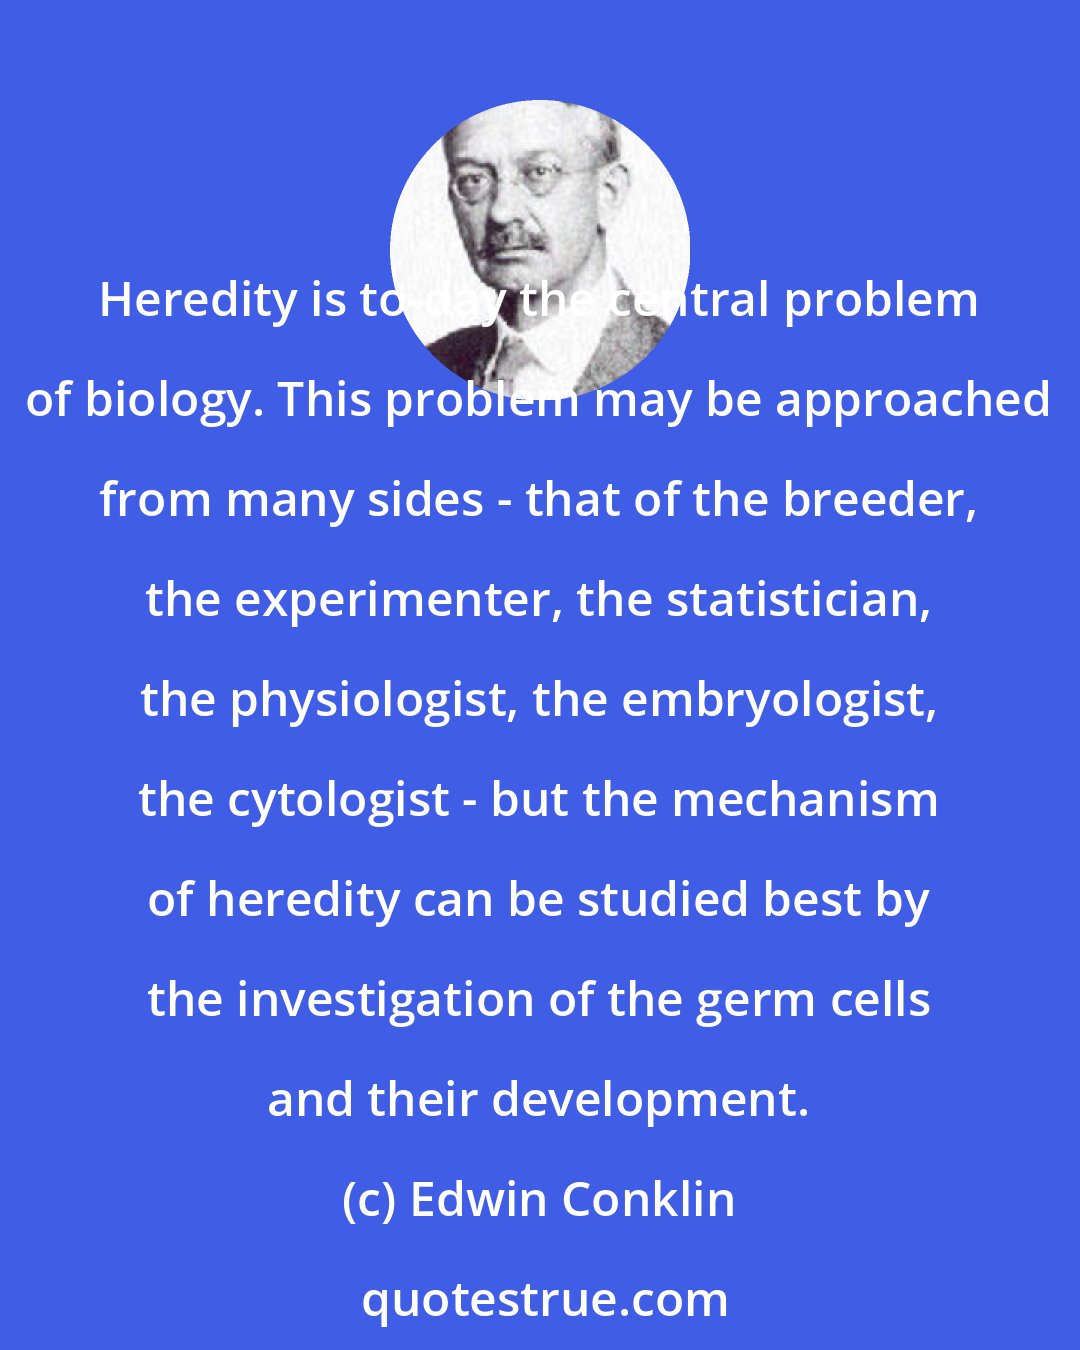 Edwin Conklin: Heredity is to-day the central problem of biology. This problem may be approached from many sides - that of the breeder, the experimenter, the statistician, the physiologist, the embryologist, the cytologist - but the mechanism of heredity can be studied best by the investigation of the germ cells and their development.